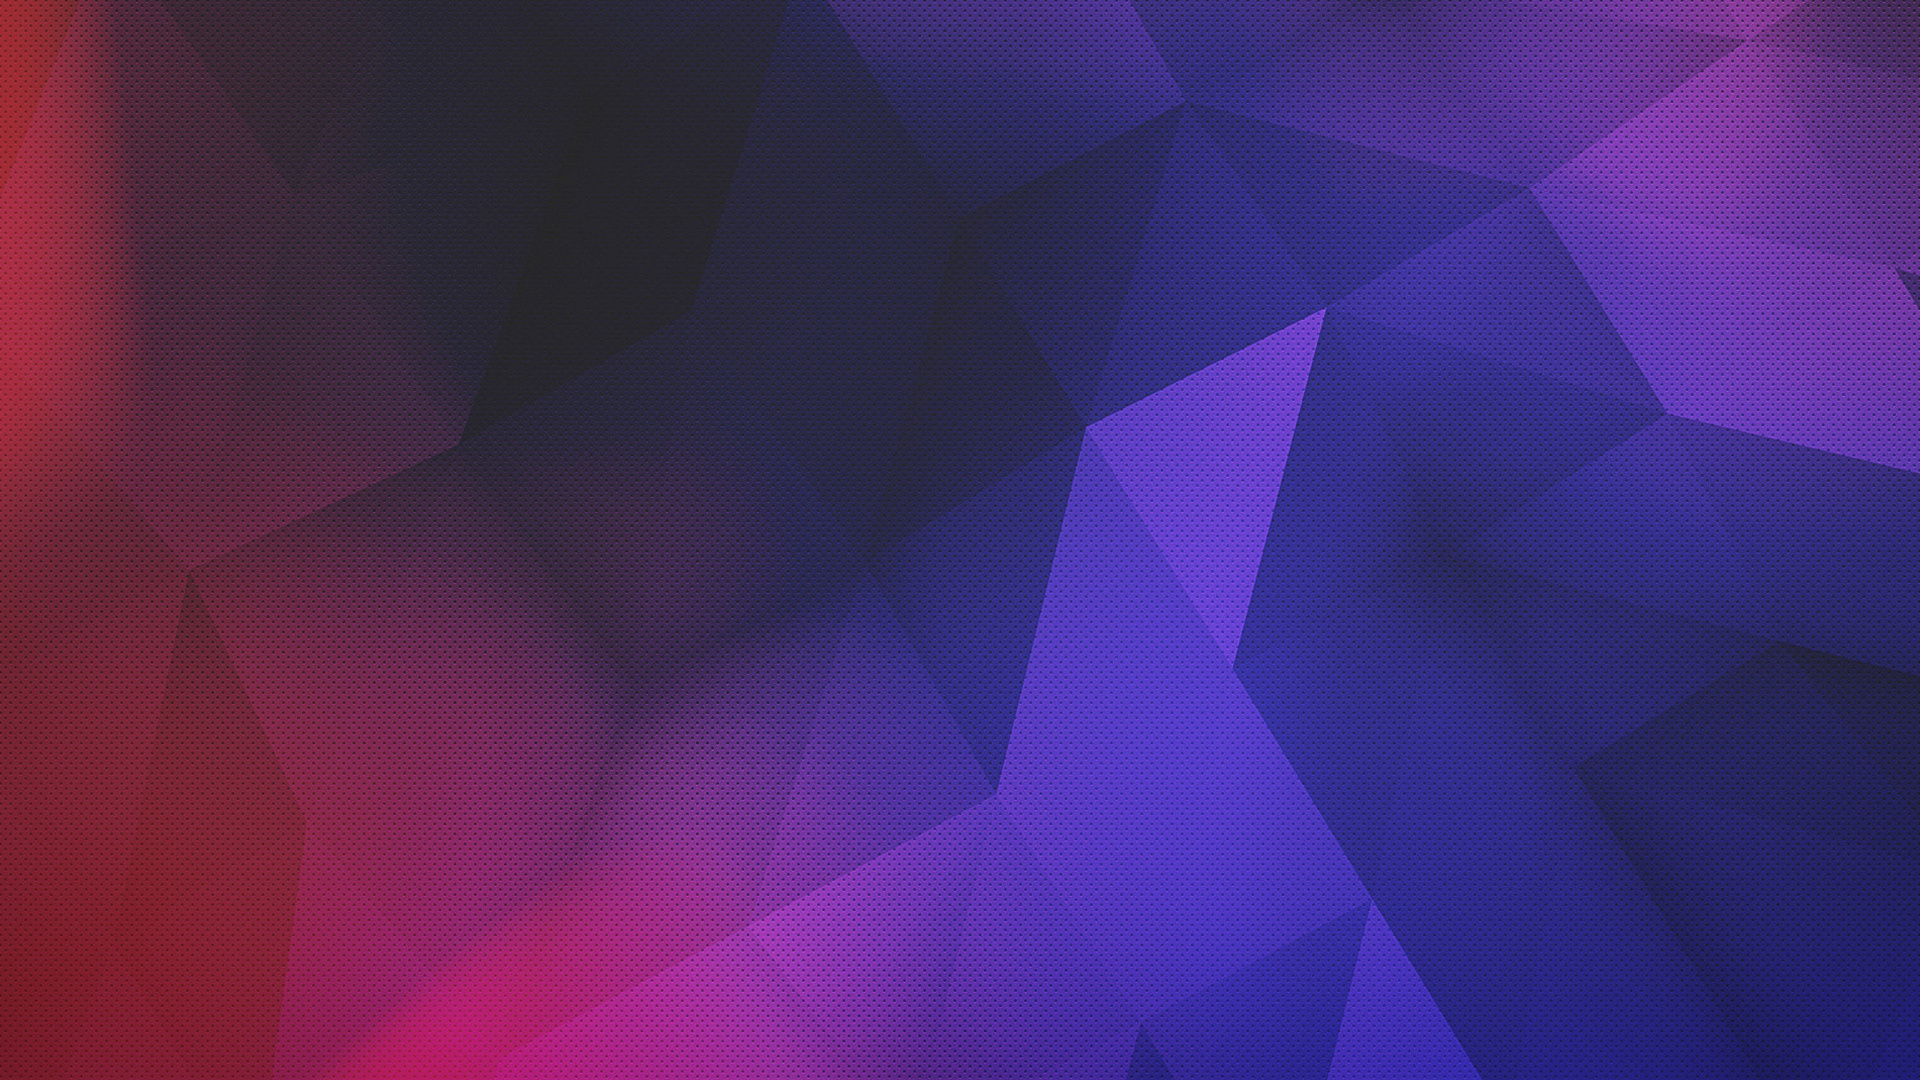 Purple and Black Checkered Textile. Wallpaper in 1920x1080 Resolution